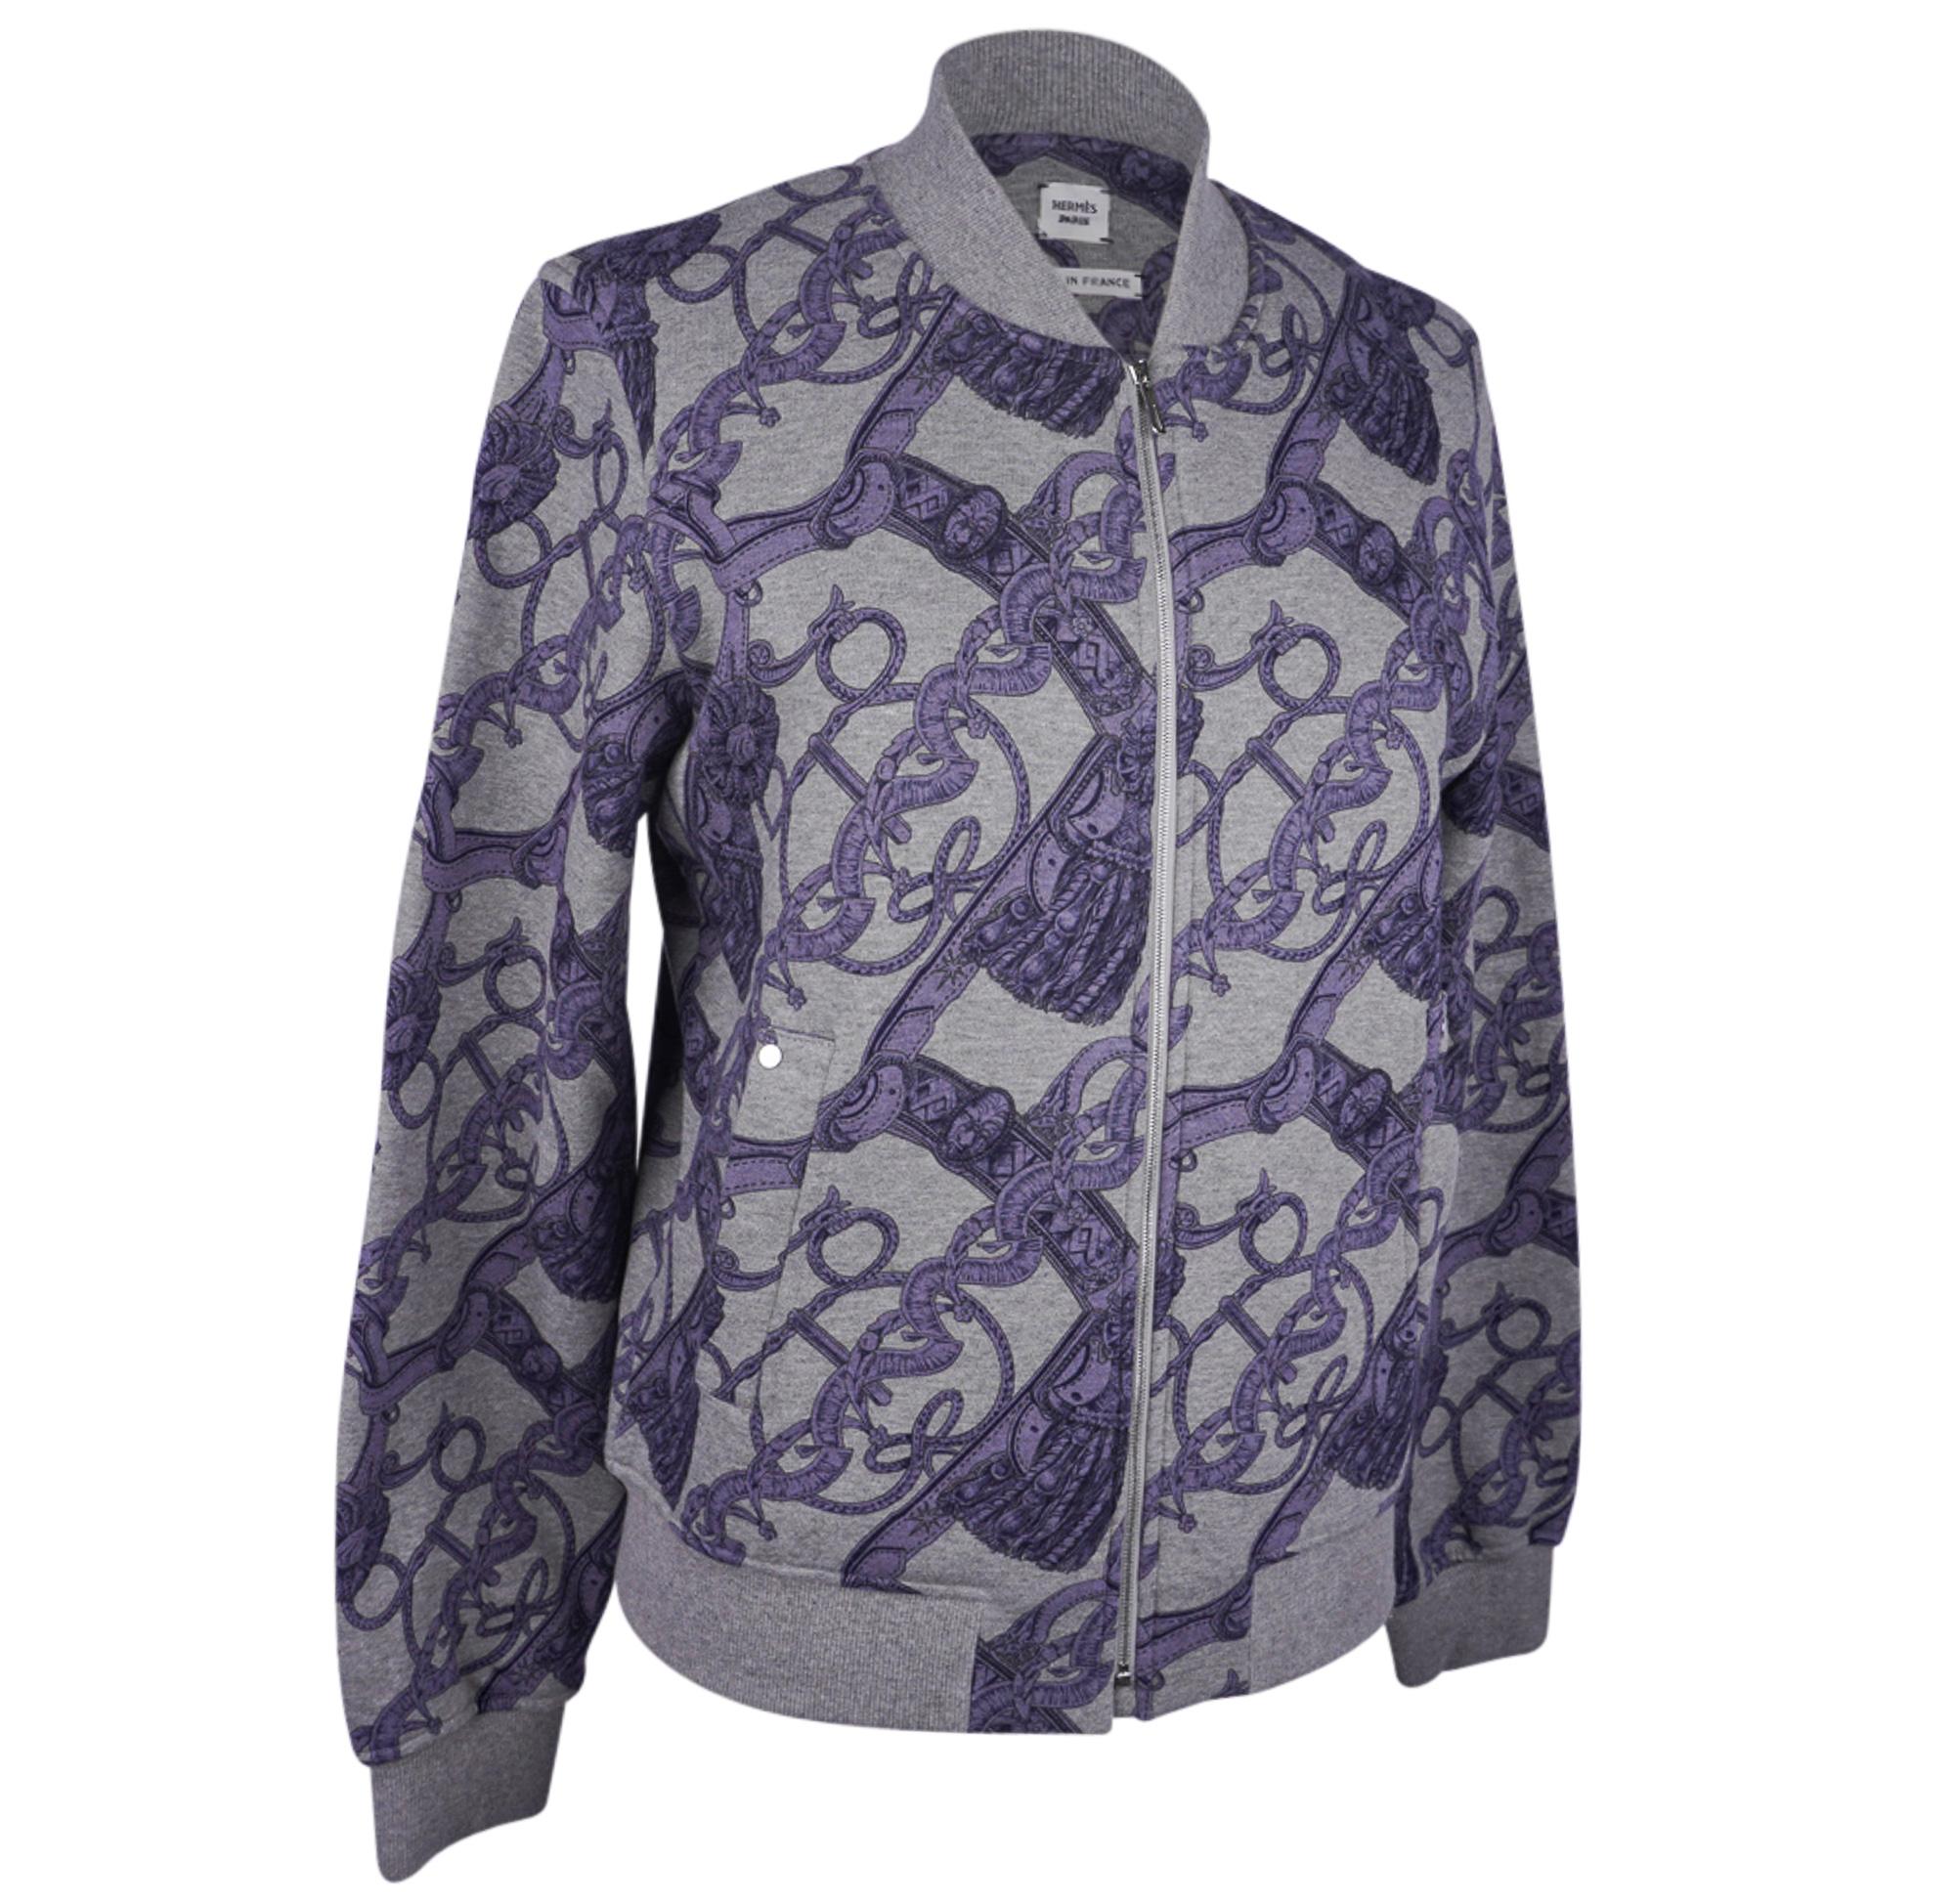 Mightychic offers Hermes Bride De Cour Gris Bleute bomber jacket.
Grey background with blue grey equestrian designs.
Zip front with palladium Hermes embossed pull.
Two pockets and facing in cotton jersey with small Clou de Selle on each.
Ribbed at